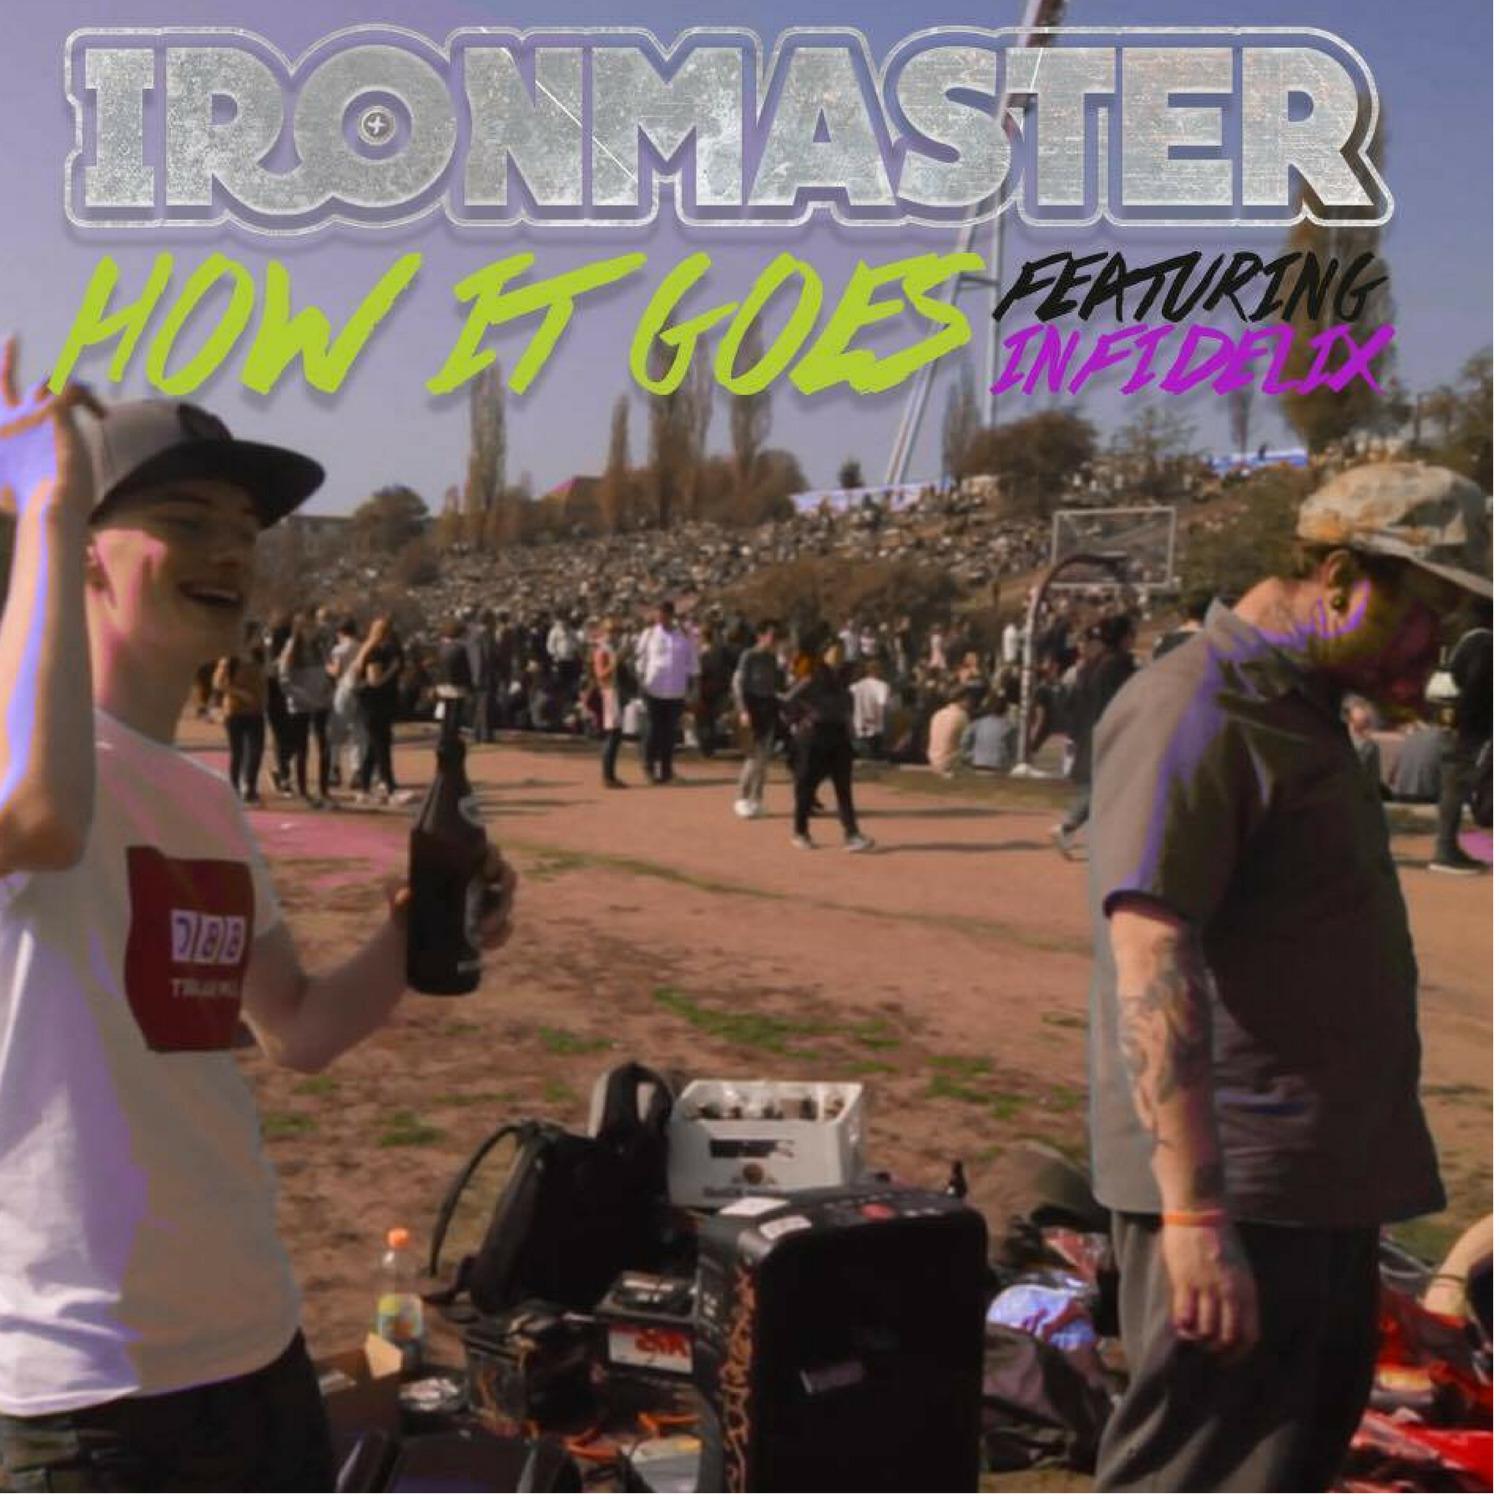 Ironmaster - How It Goes (feat. Infidelix)